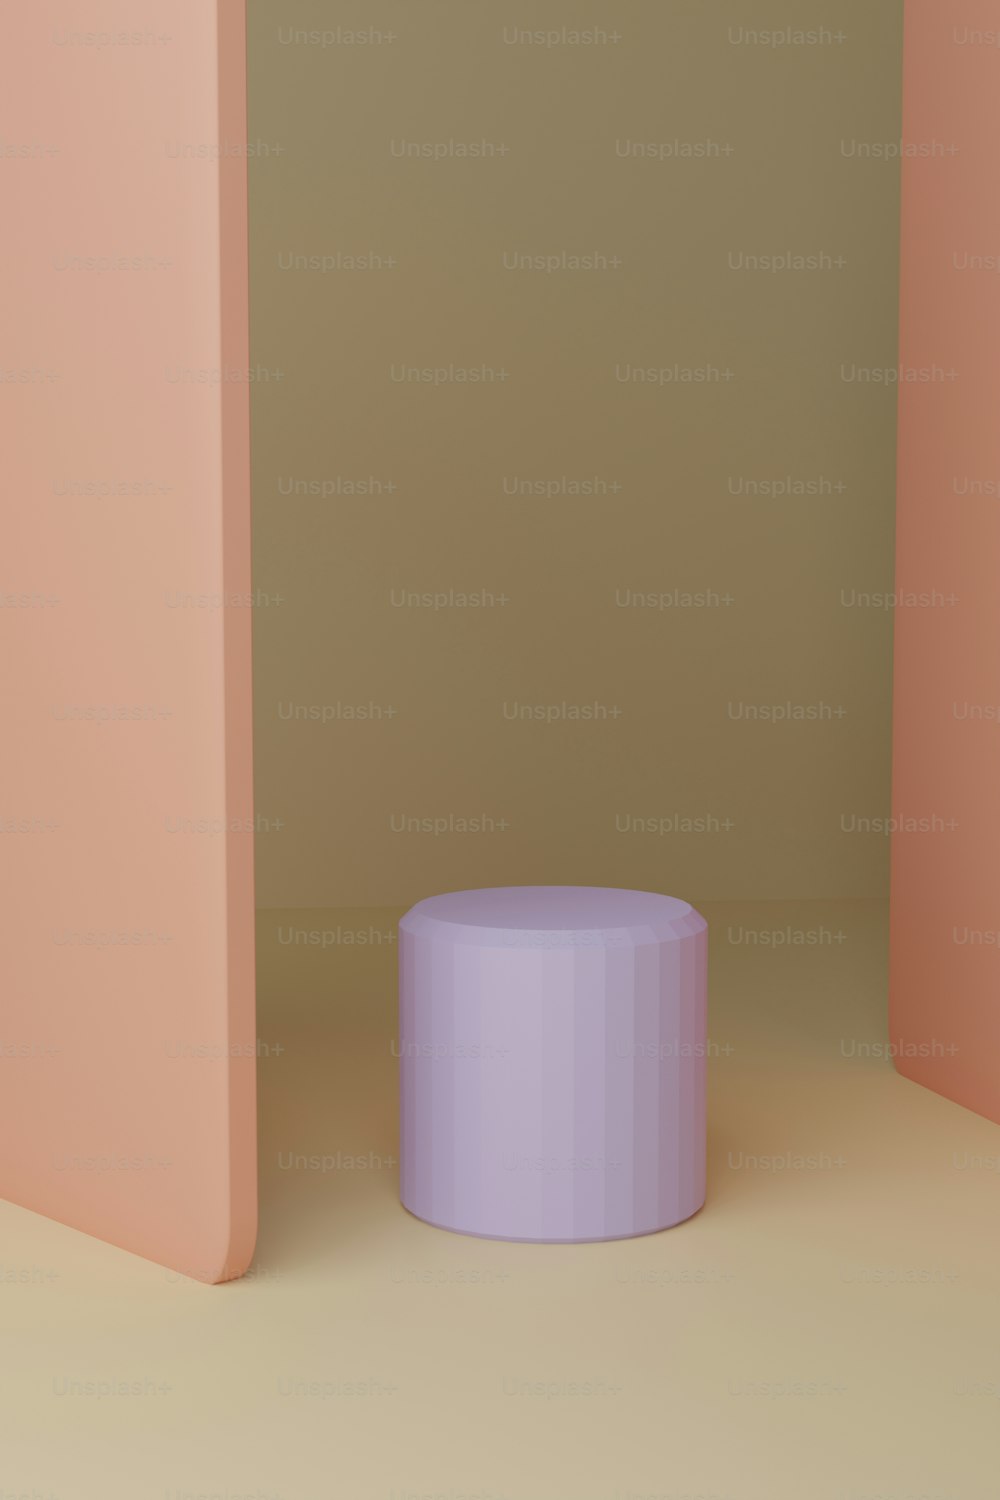 a round object sitting in the middle of a room